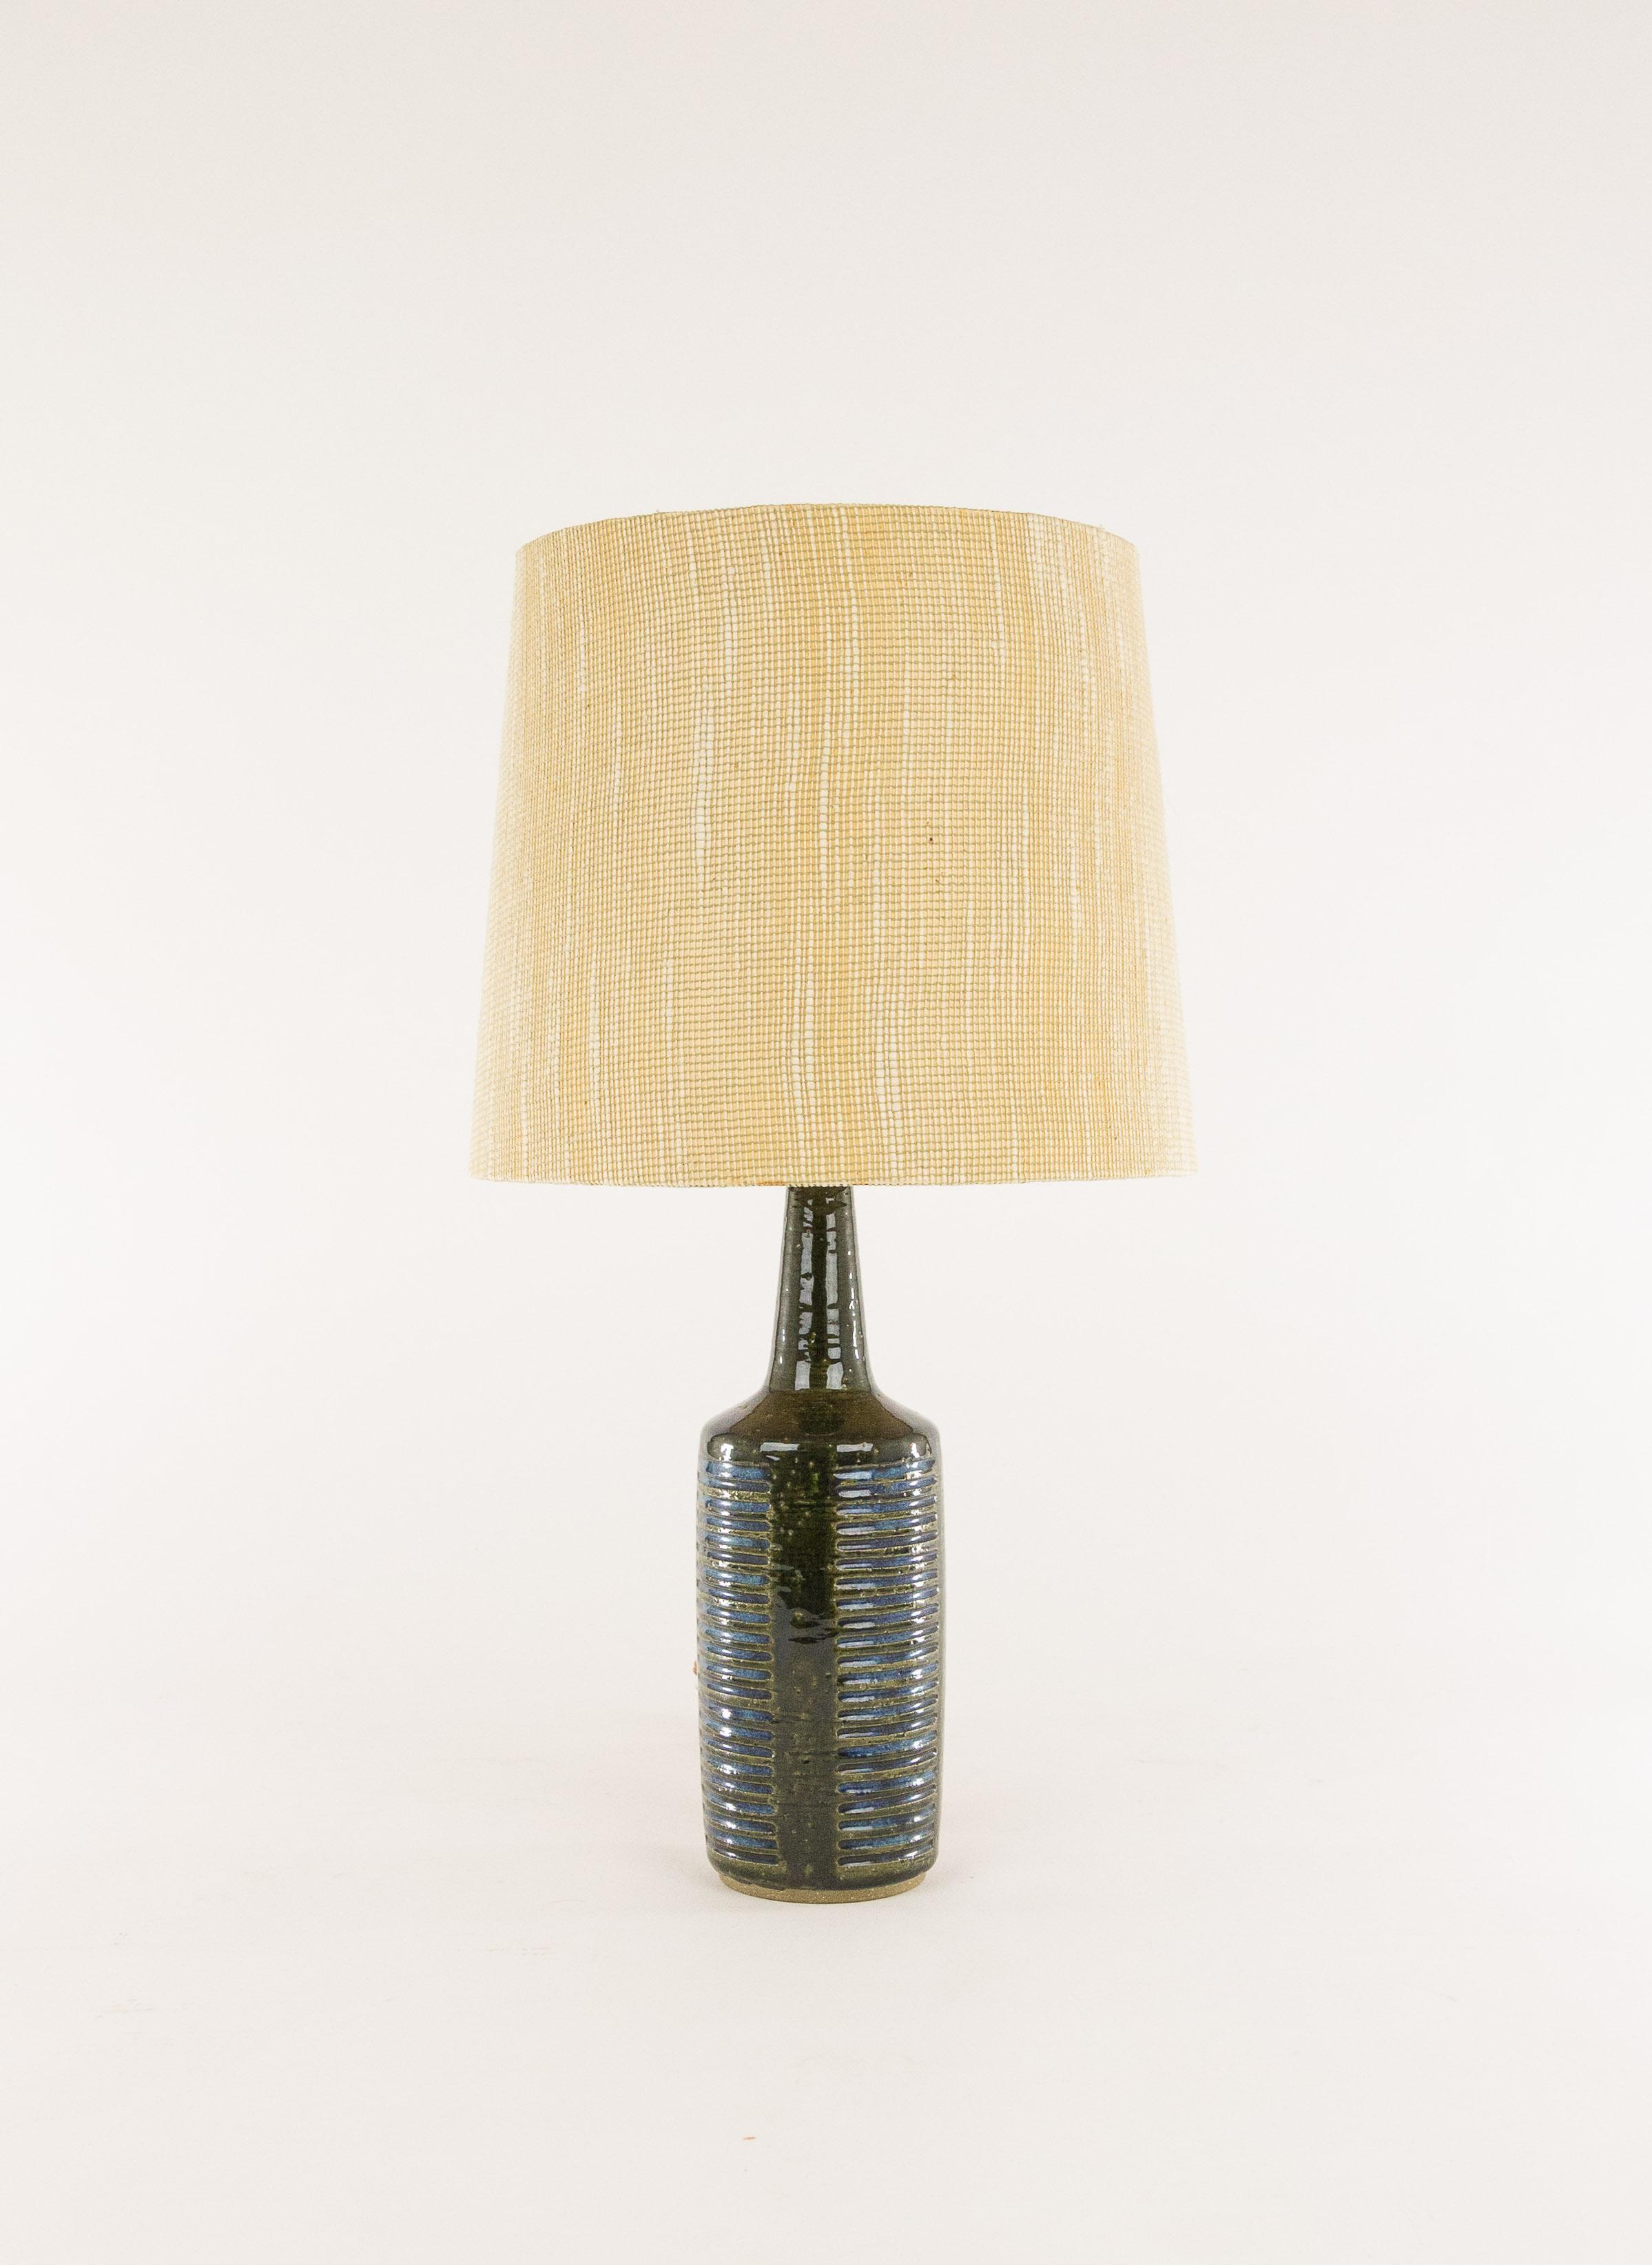 Danish chamotte (texture clay) table lamp with impressed decoration by Annelise and Per Linnemann-Schmidt for Palshus, Denmark, 1960s.

Palshus produced a wide range of table lamps, in different patterns, height and colors (various shades of brown,